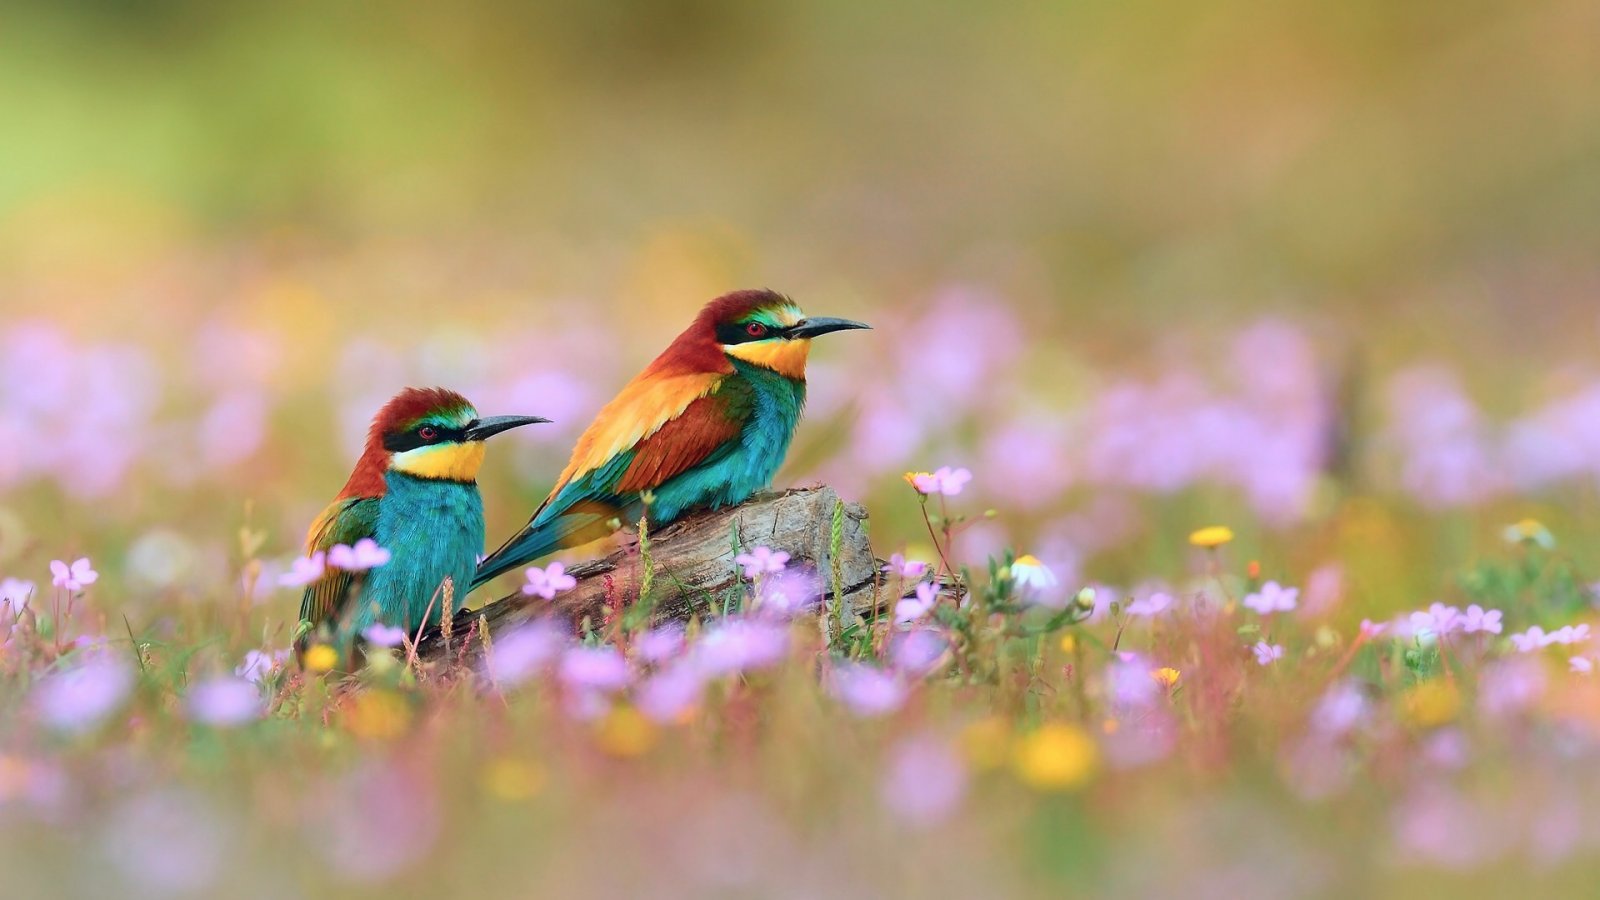 flowers for flower lovers Flowers and birds desktop wallpapers 1600x900